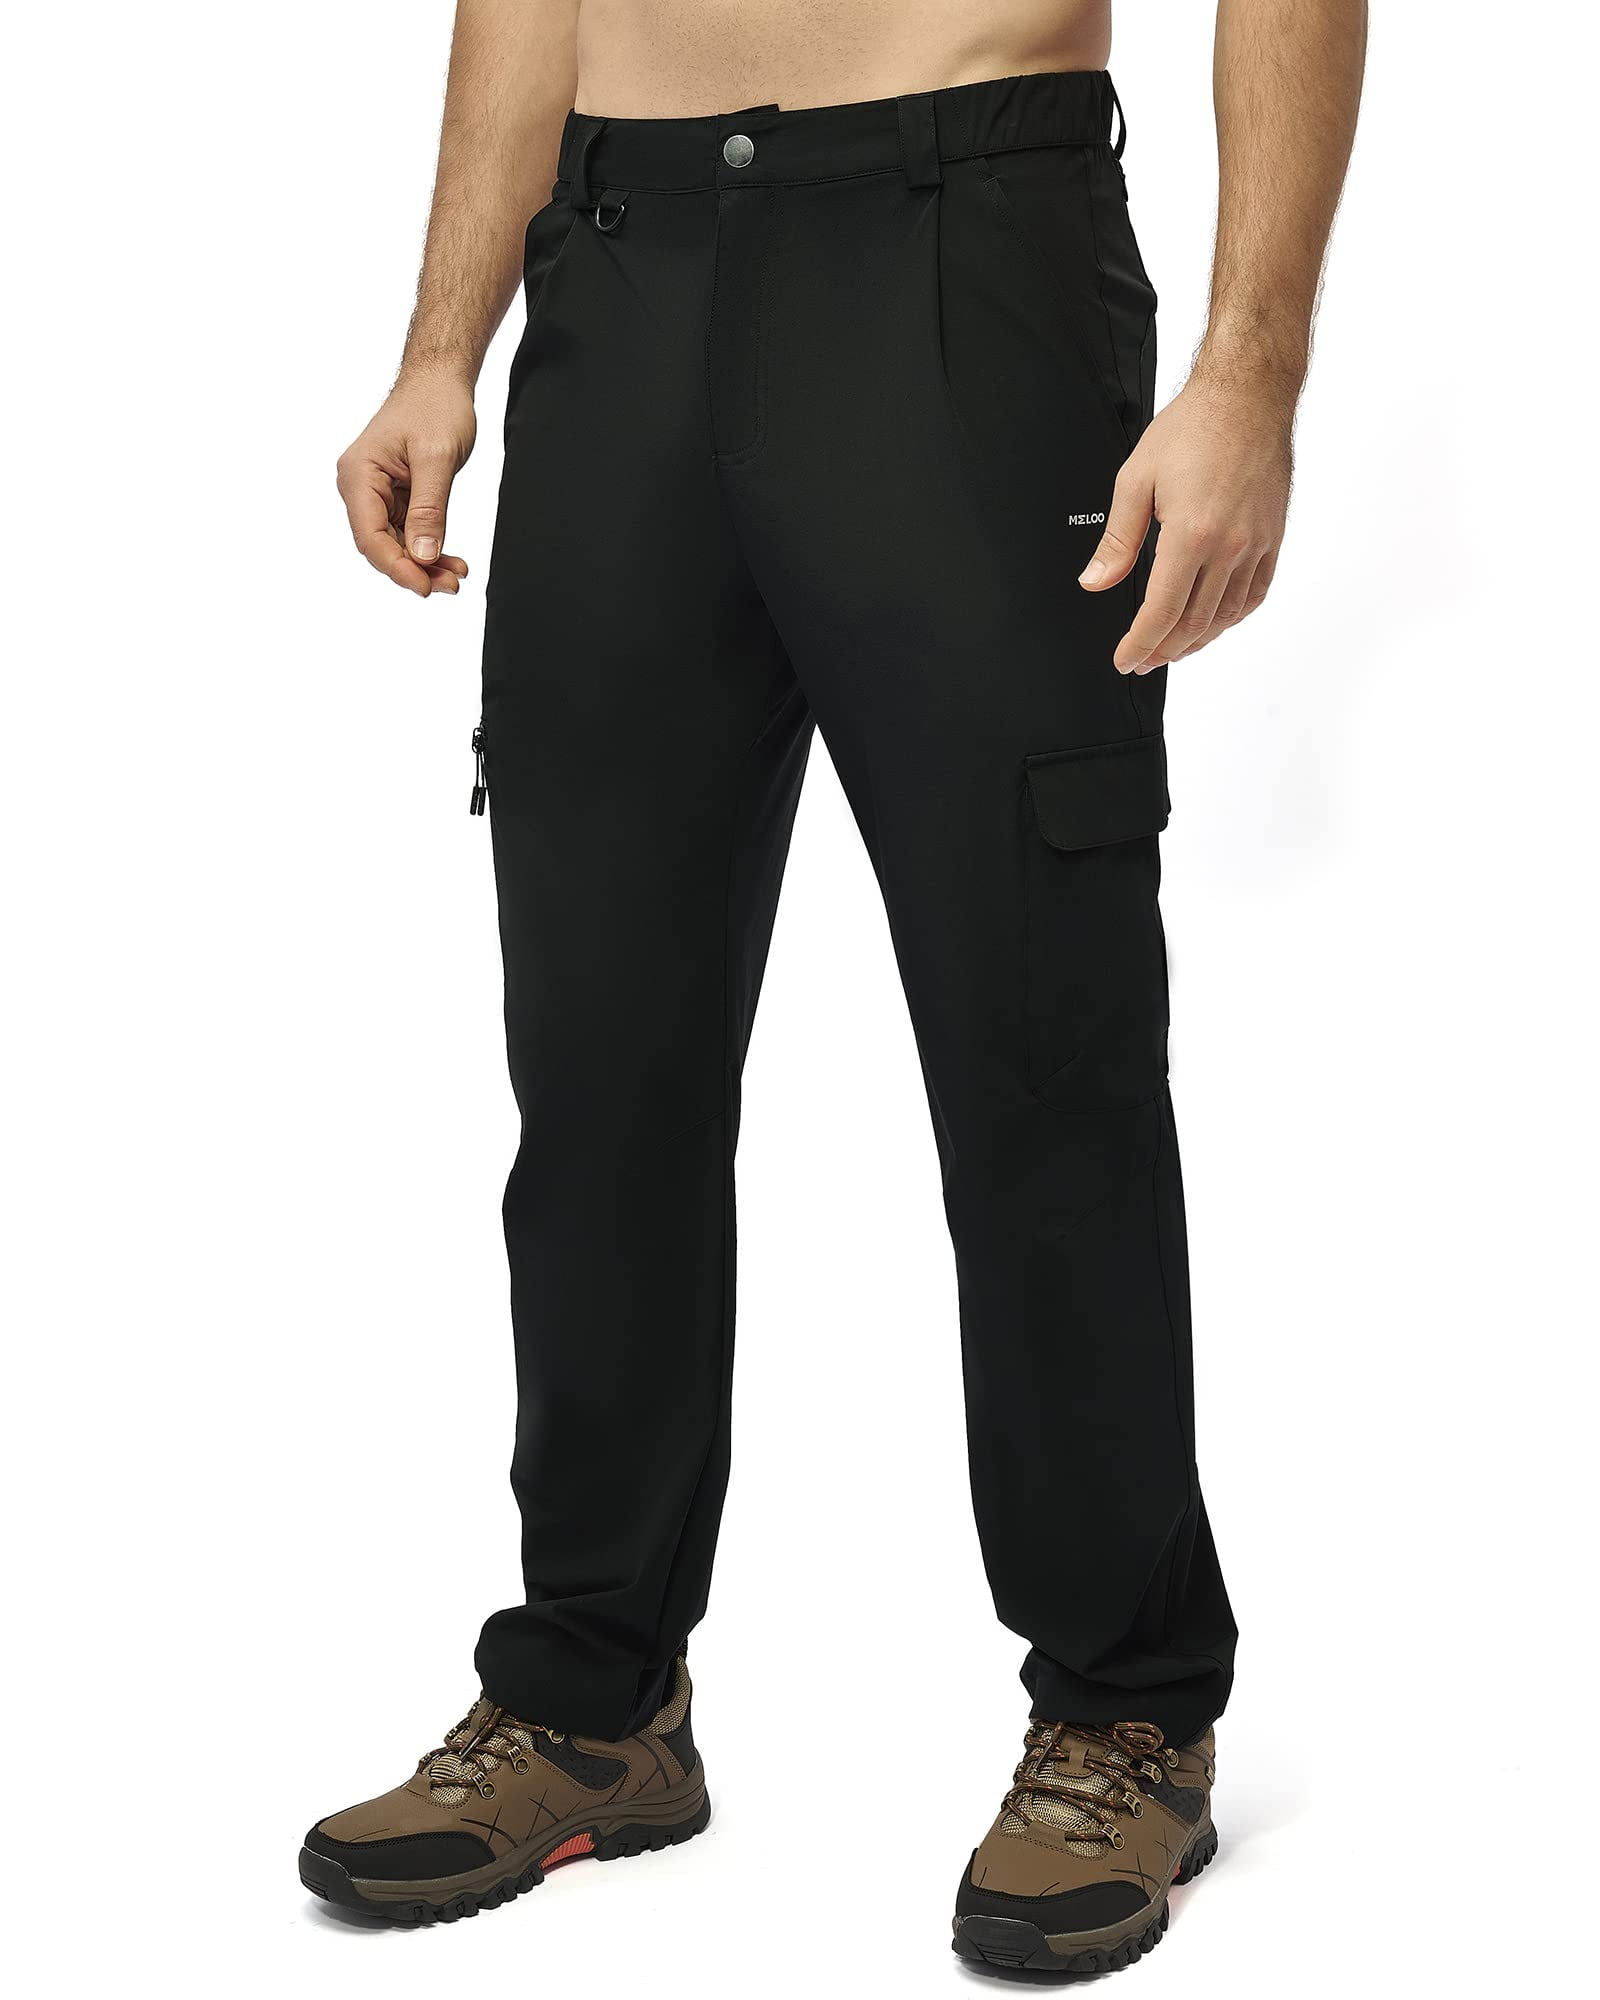 MELOO Men's Hiking Cargo Pants - Outdoor Lightweight Water Resistant Travel  Pants Multi Pockets Fishing Camping Work Black XS 